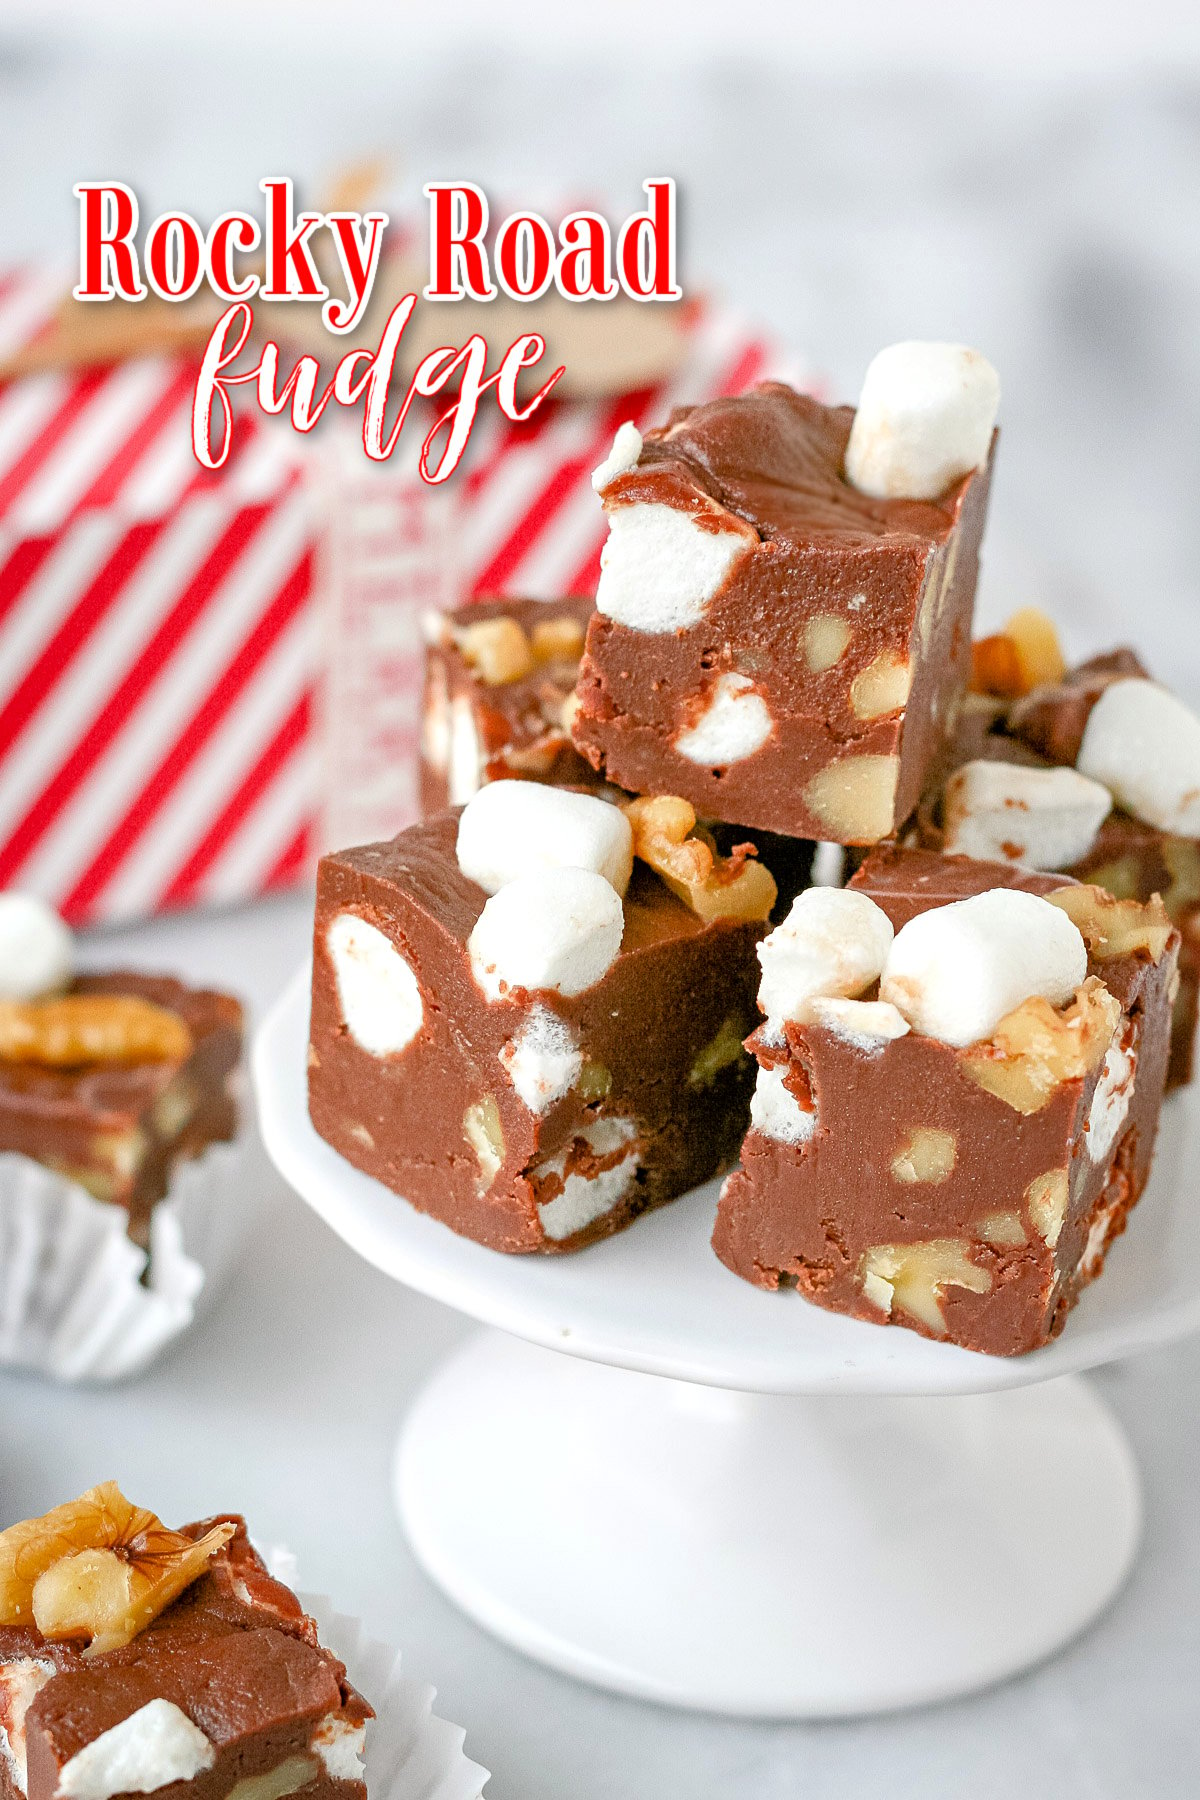 pieces of rocky road fudge on small cupcake stand with red and white striped gift box in background and title overlay at the top of the image